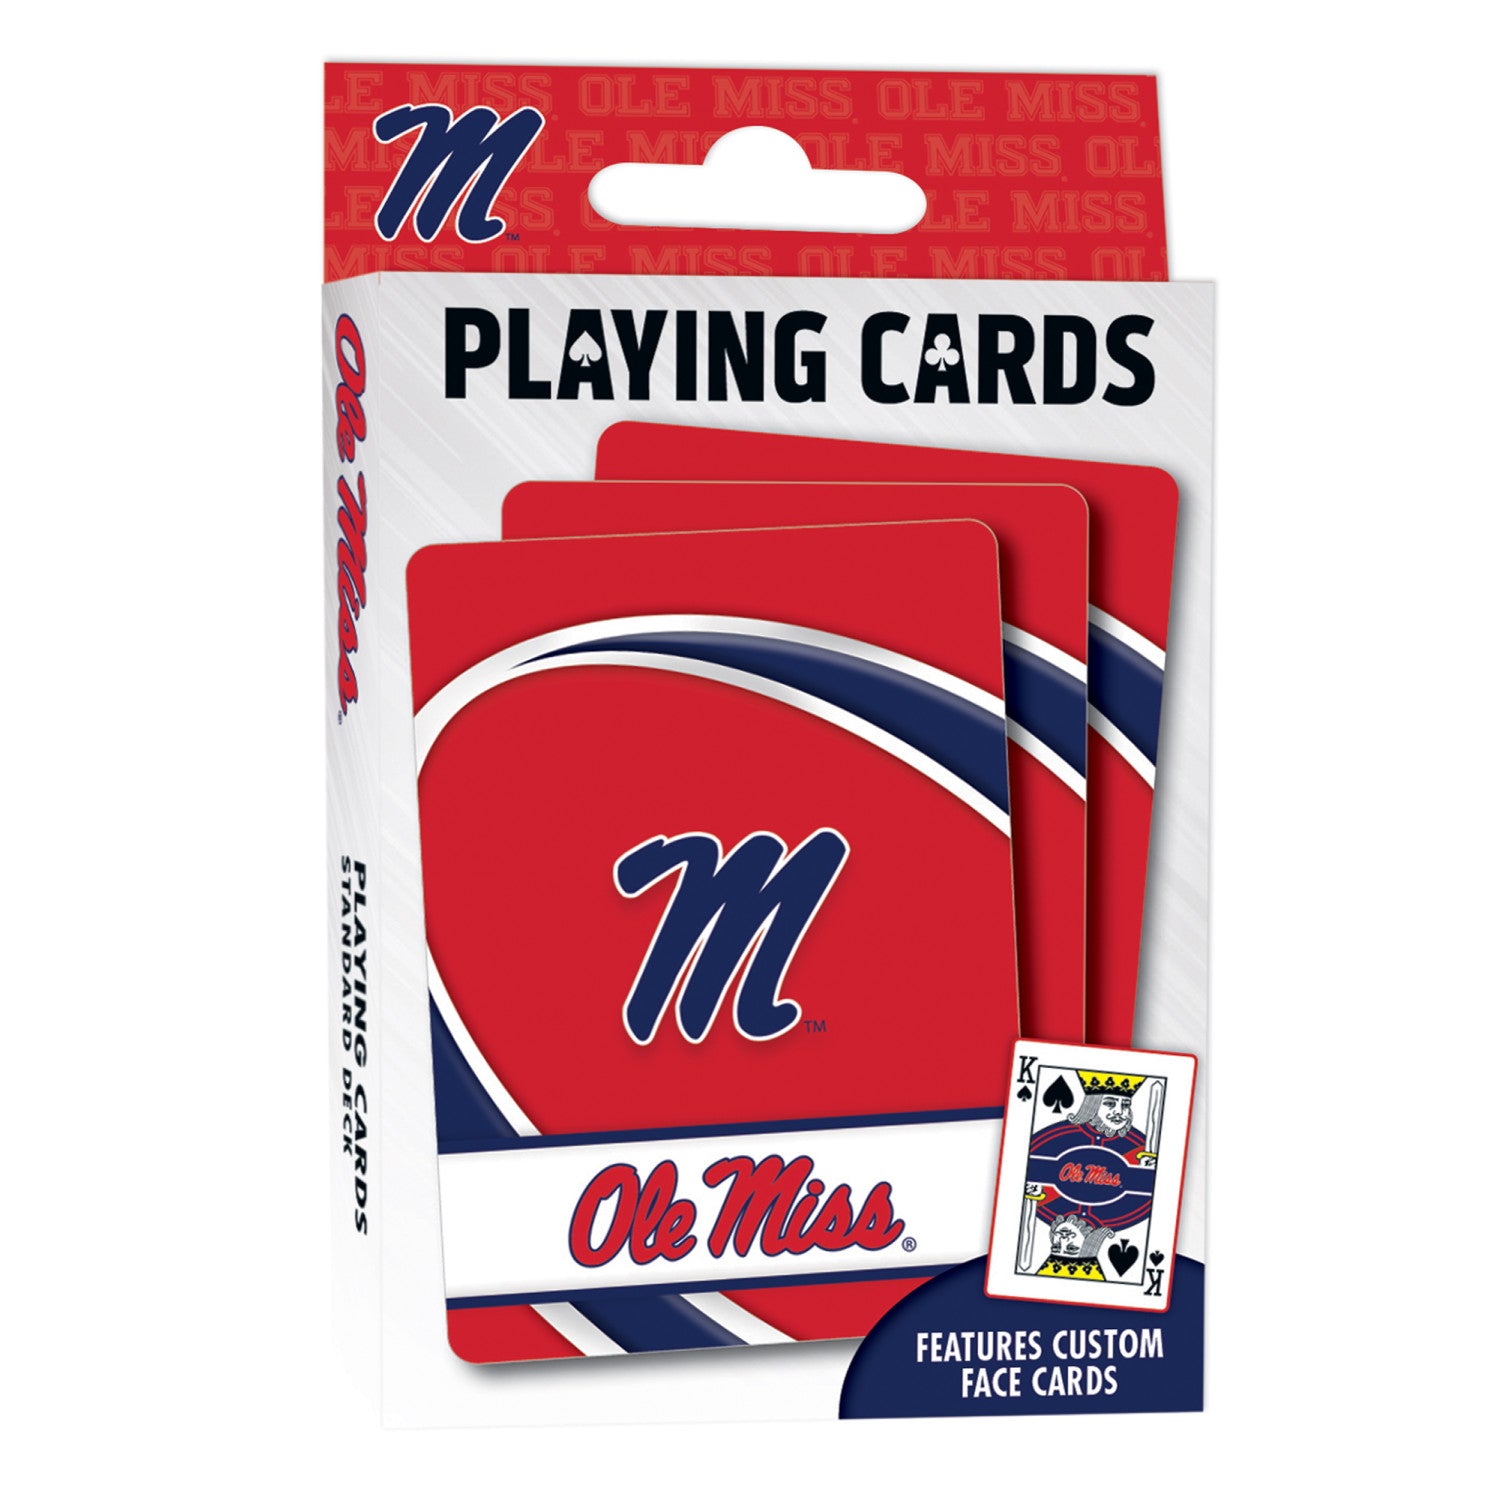 Ole Miss Rebels Playing Cards - 54 Card Deck